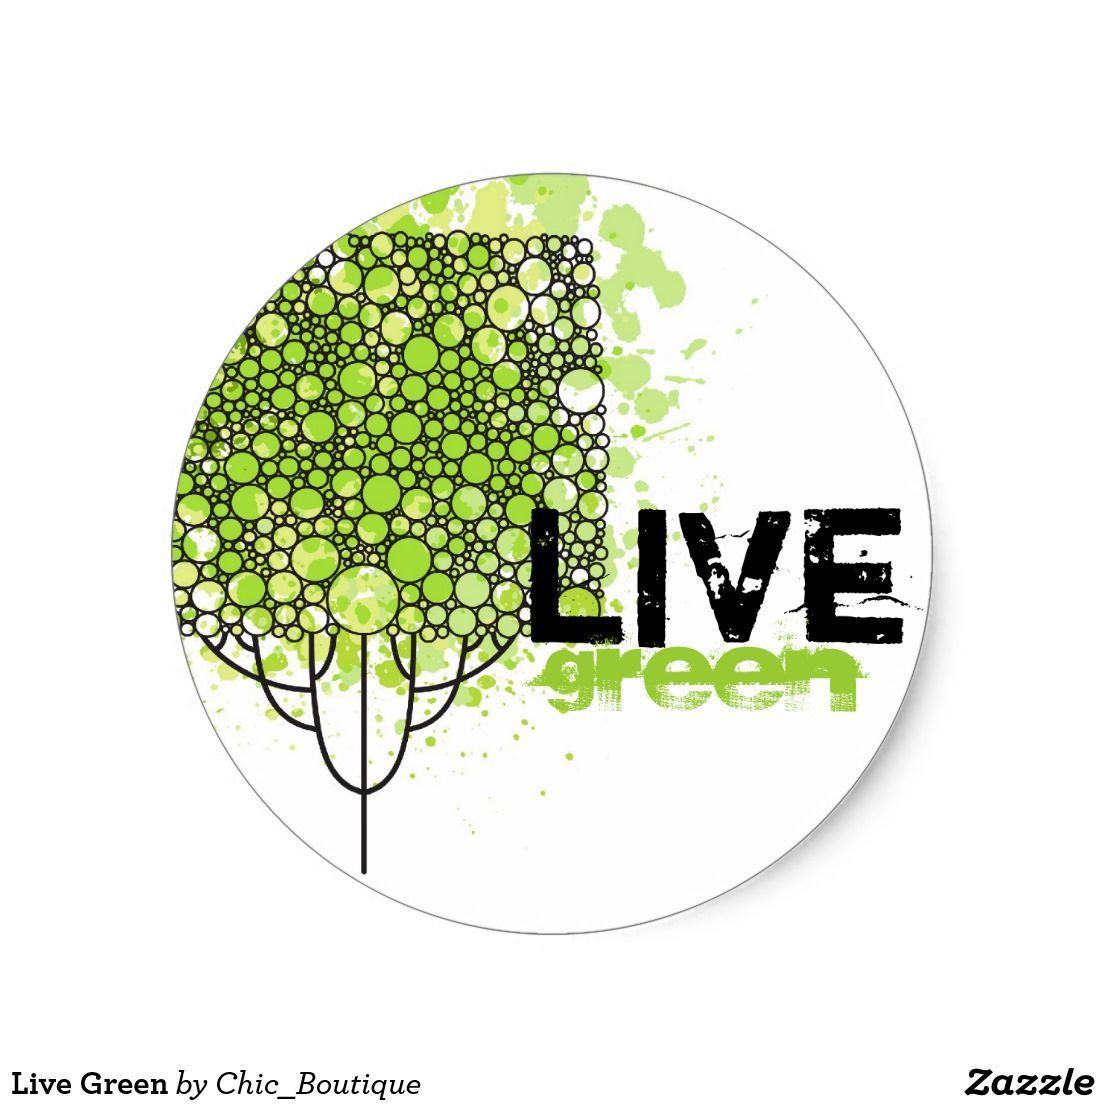 Going Green Chemicals Logo - Live Green Classic Round Sticker. Chemical Free Living